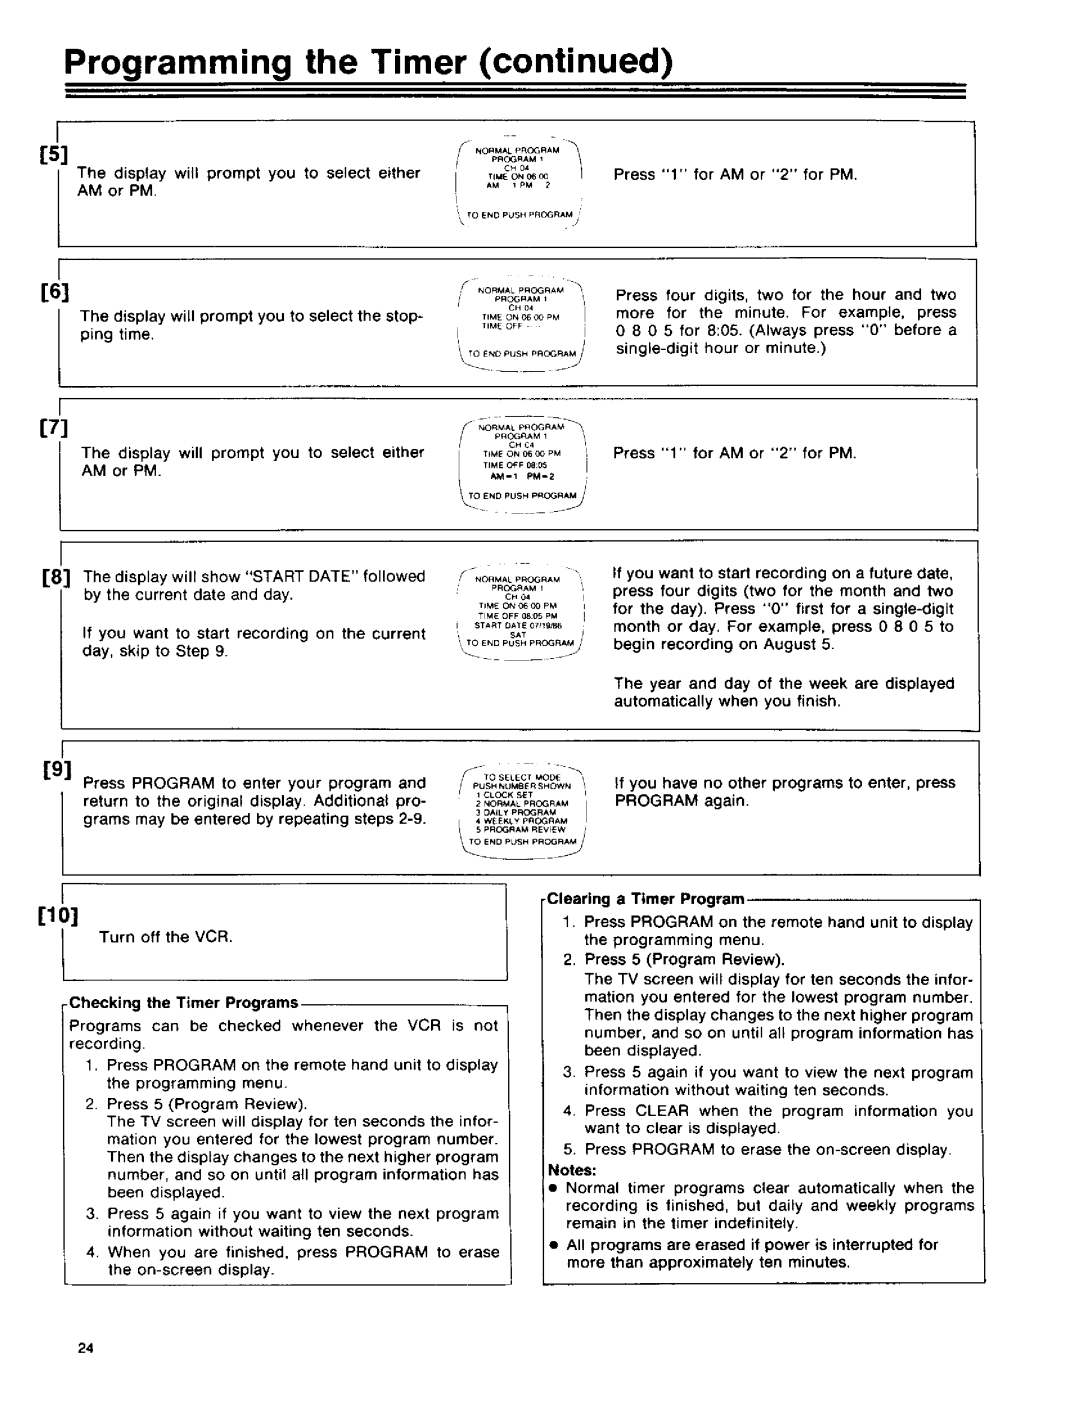 RCA 390 owner manual Programming the Timer continued 